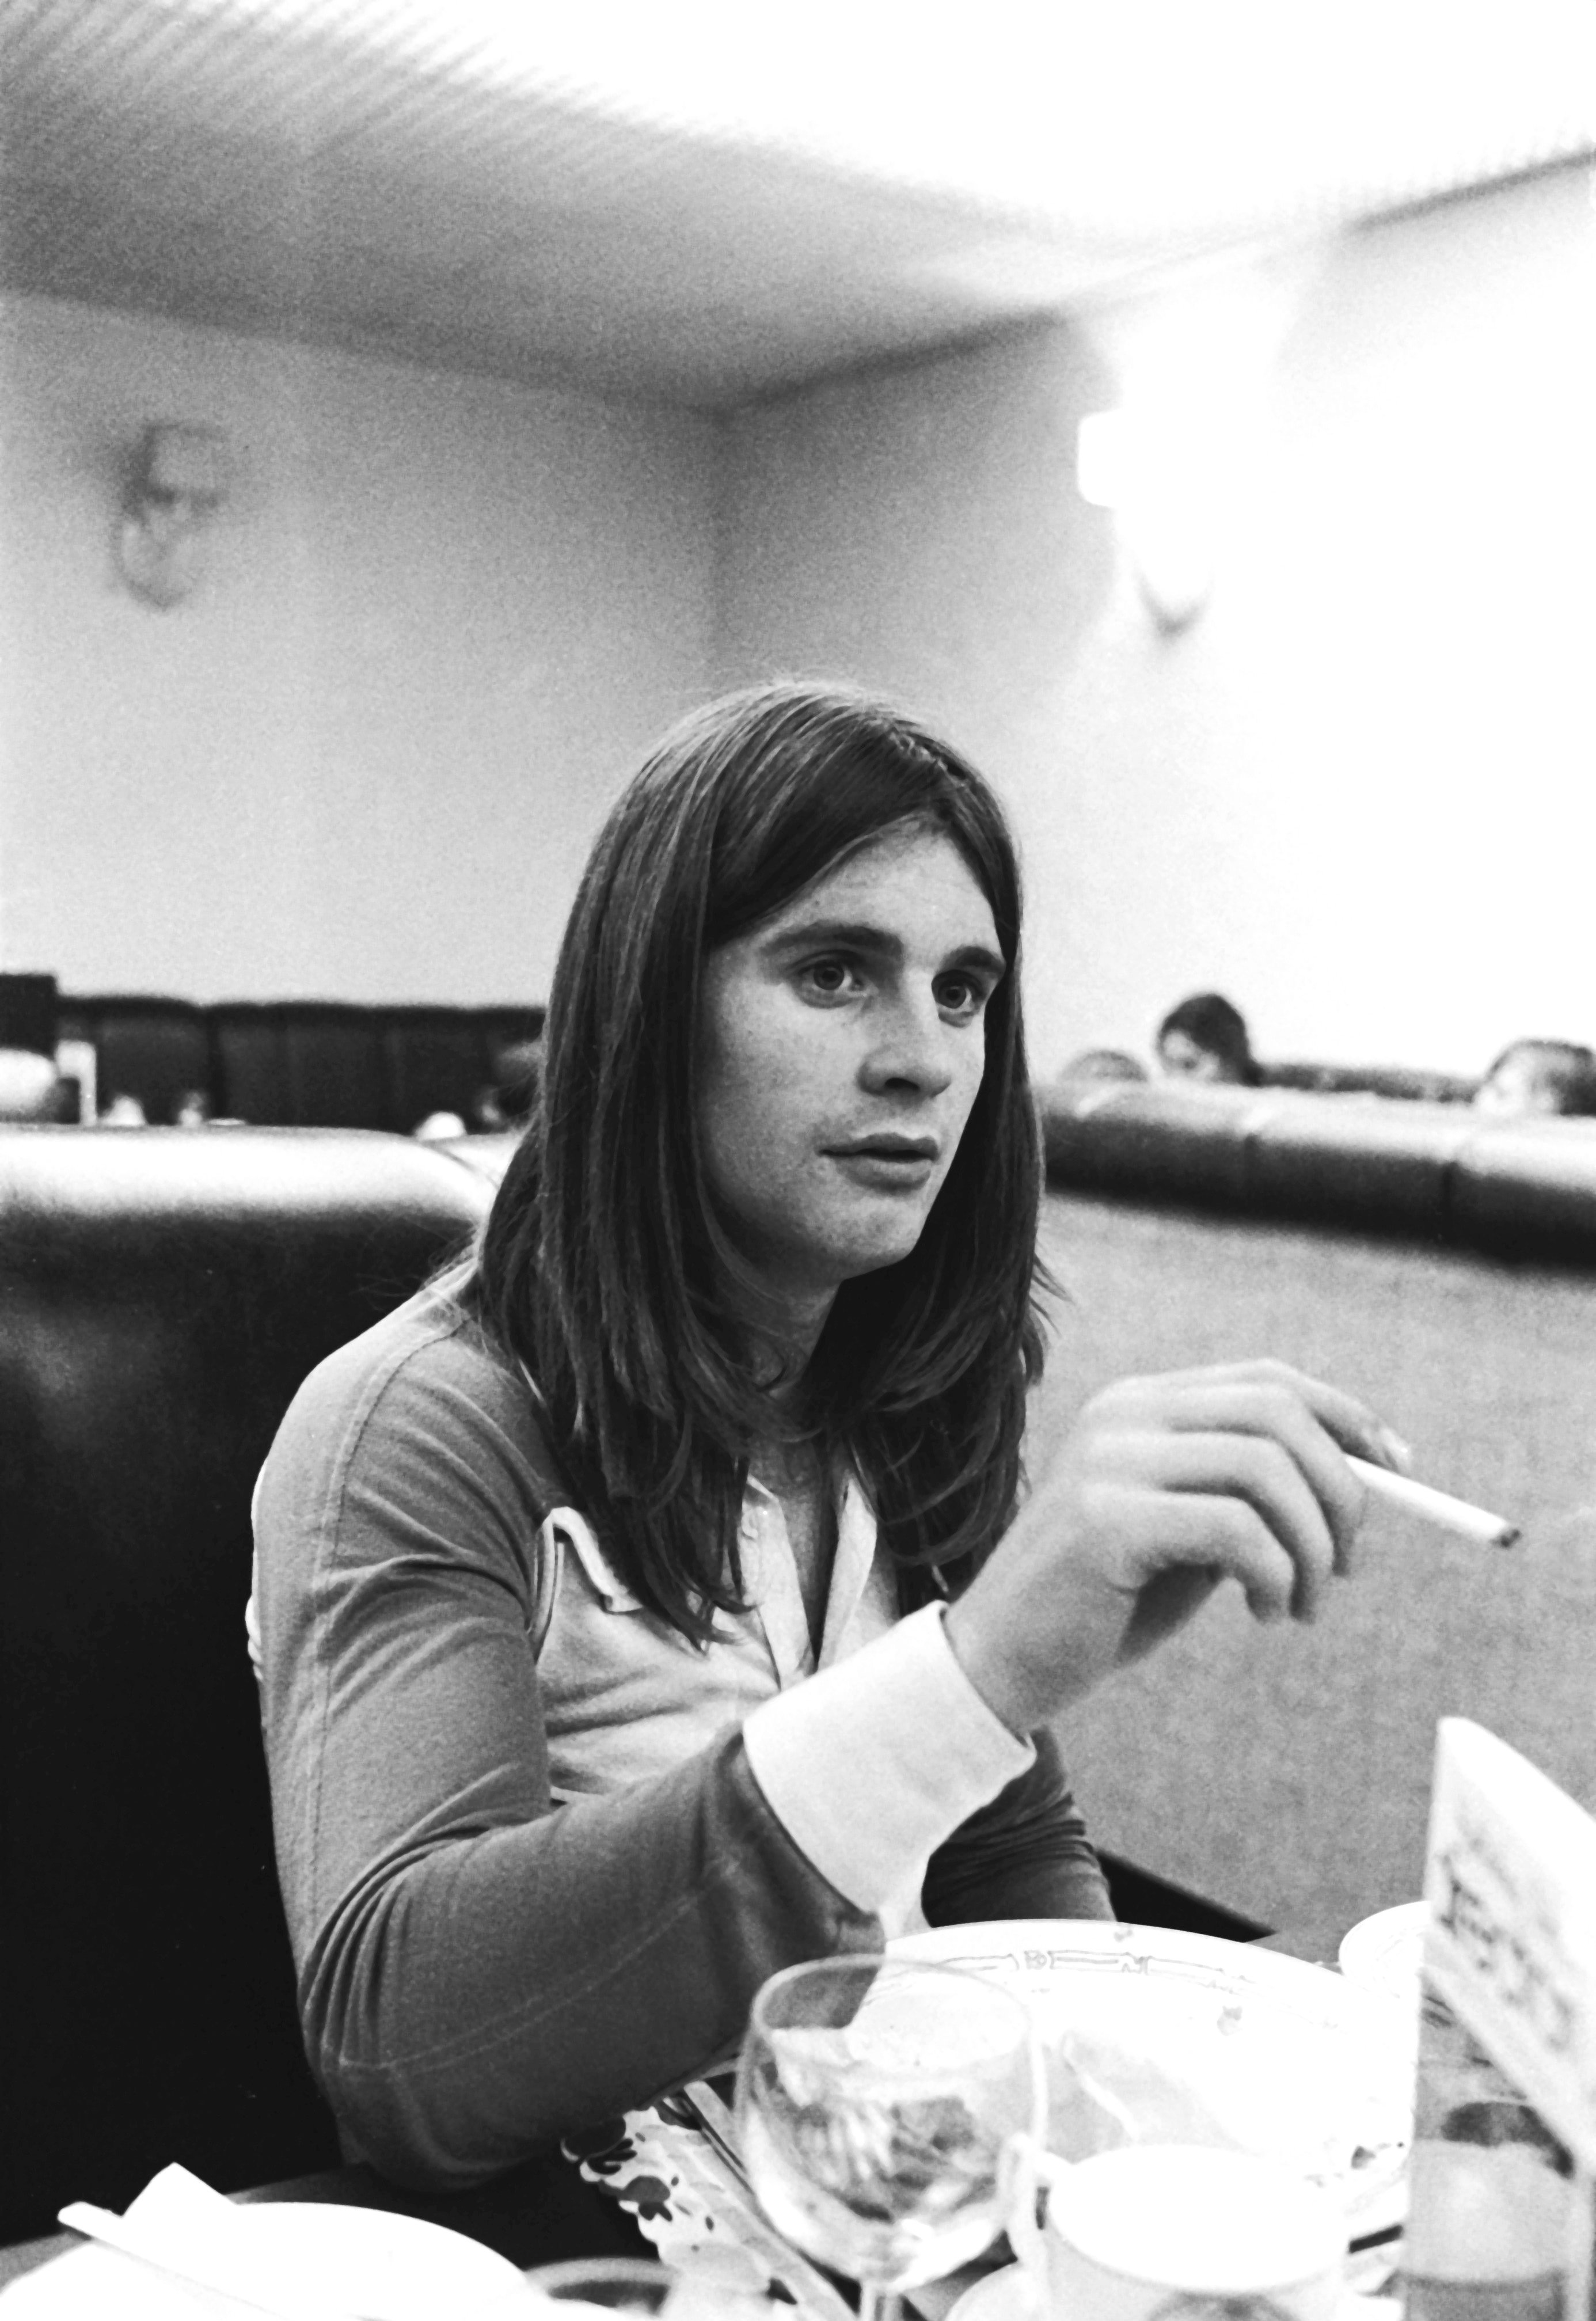 A young Ozzy Osbourne. | Photo: Getty Images